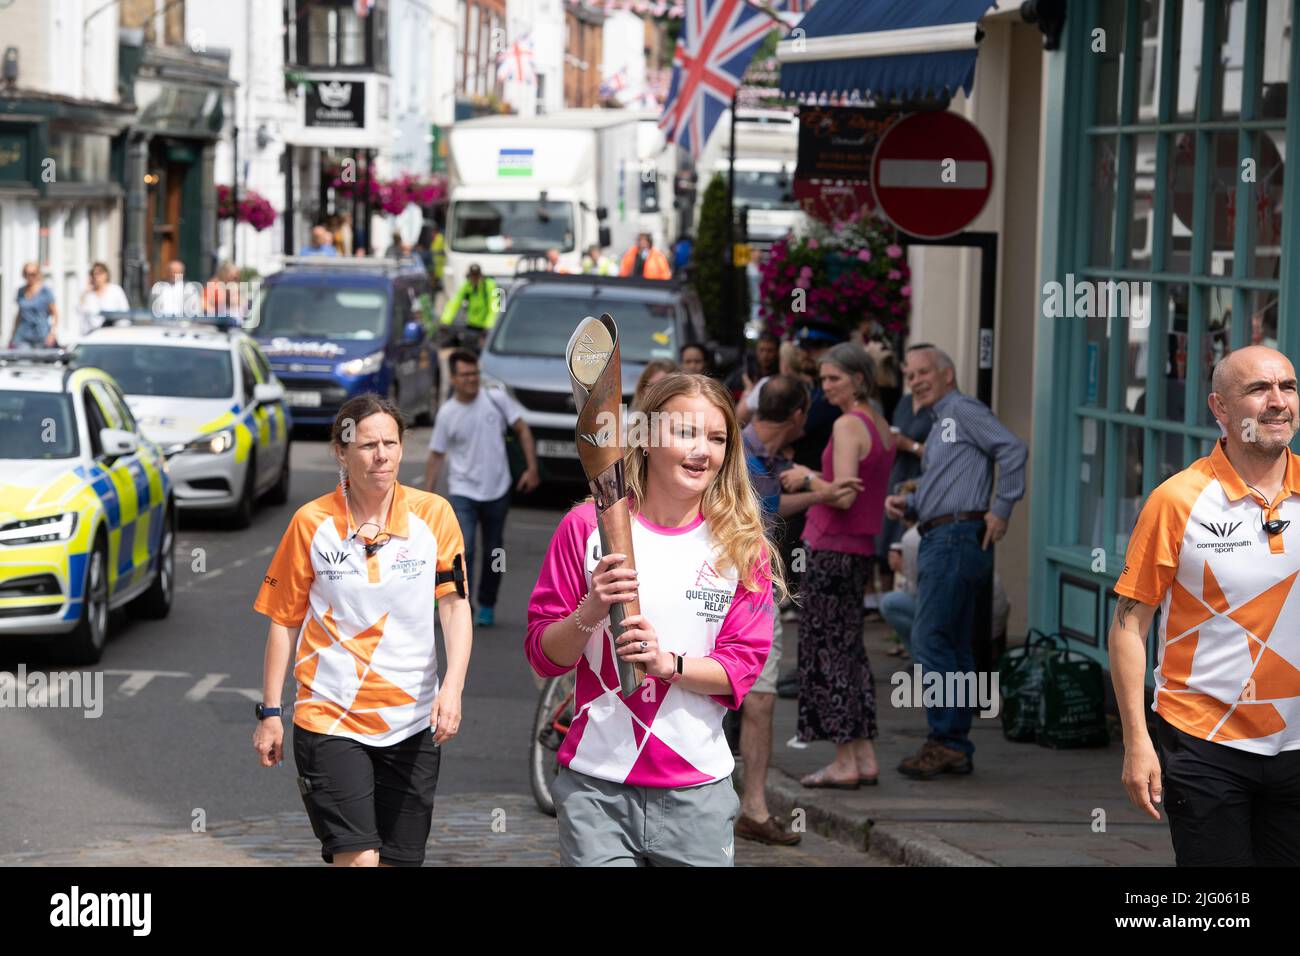 Eton, Windsor, Berkshire, UK. 6th July, 2022. Judo Olympian Ray Stevens carried the baton in Windsor. The Birmingham 2022 Queen's Baton Relay came to Eton High Street and Windsor Bridge this morning. The convoy are travelling to the Isle of Wight next. Credit: Maureen McLean/Alamy Live News. 6th July, 2022. The Birmingham 2022 Queen's Baton Relay came to Eton High Street and Windsor Bridge this morning. The convoy are travelling to the Isle of Wight next. Credit: Maureen McLean/Alamy Live News 6th July, 2022. A Police escort for The Birmingham 2022 Queen's Baton Relay which came to Eton High S Stock Photo